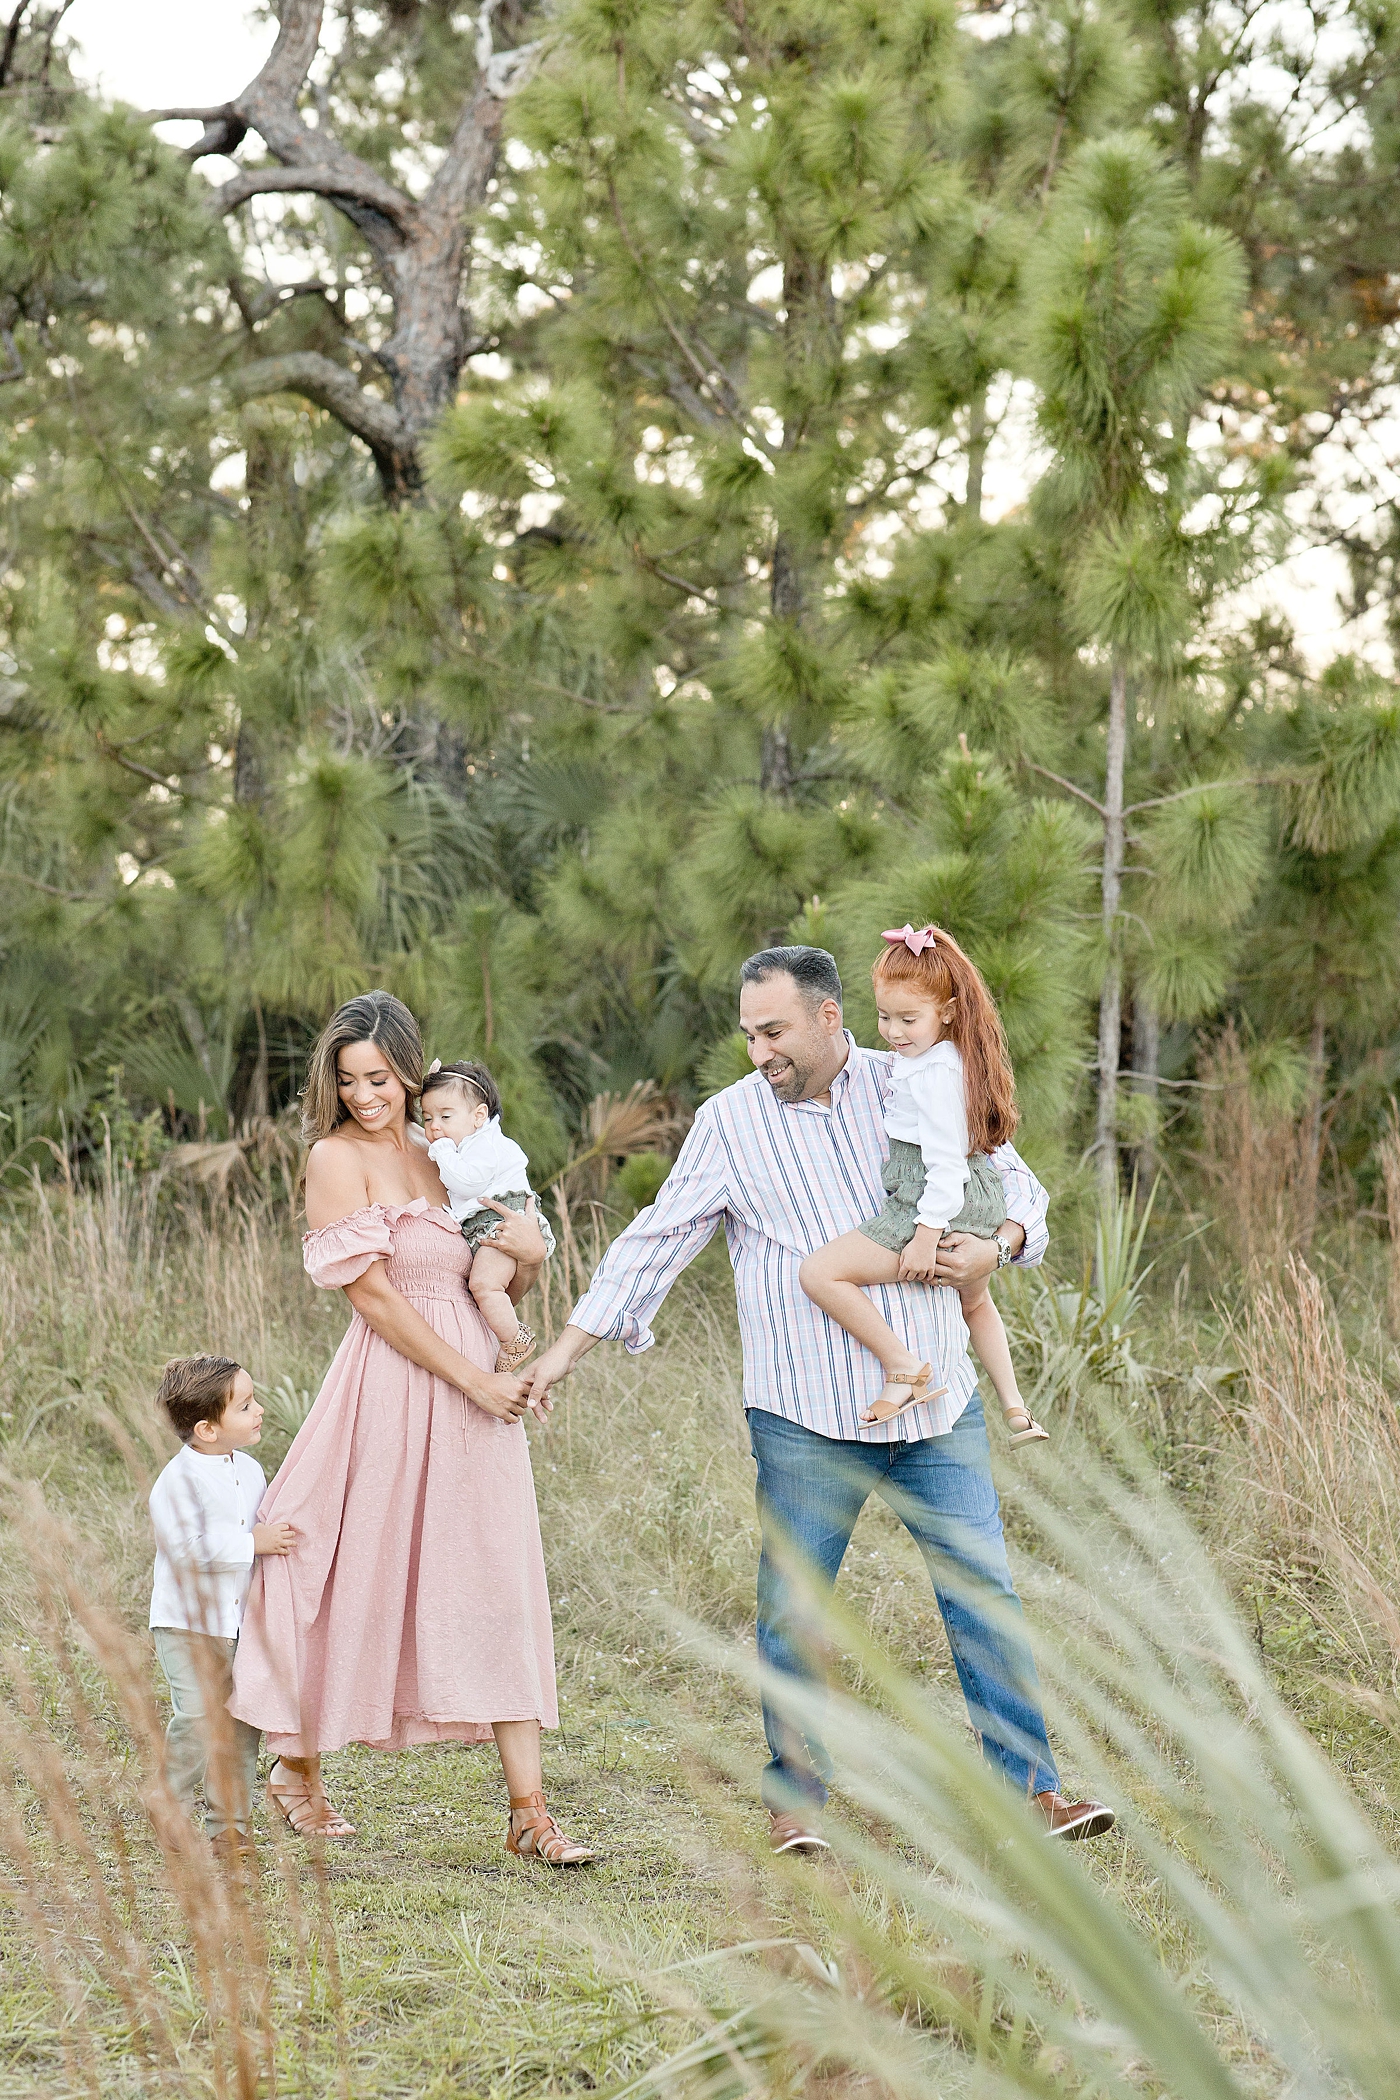 Miami family strolls through field during family photo session. Photo by Ivanna Vidal Photography.